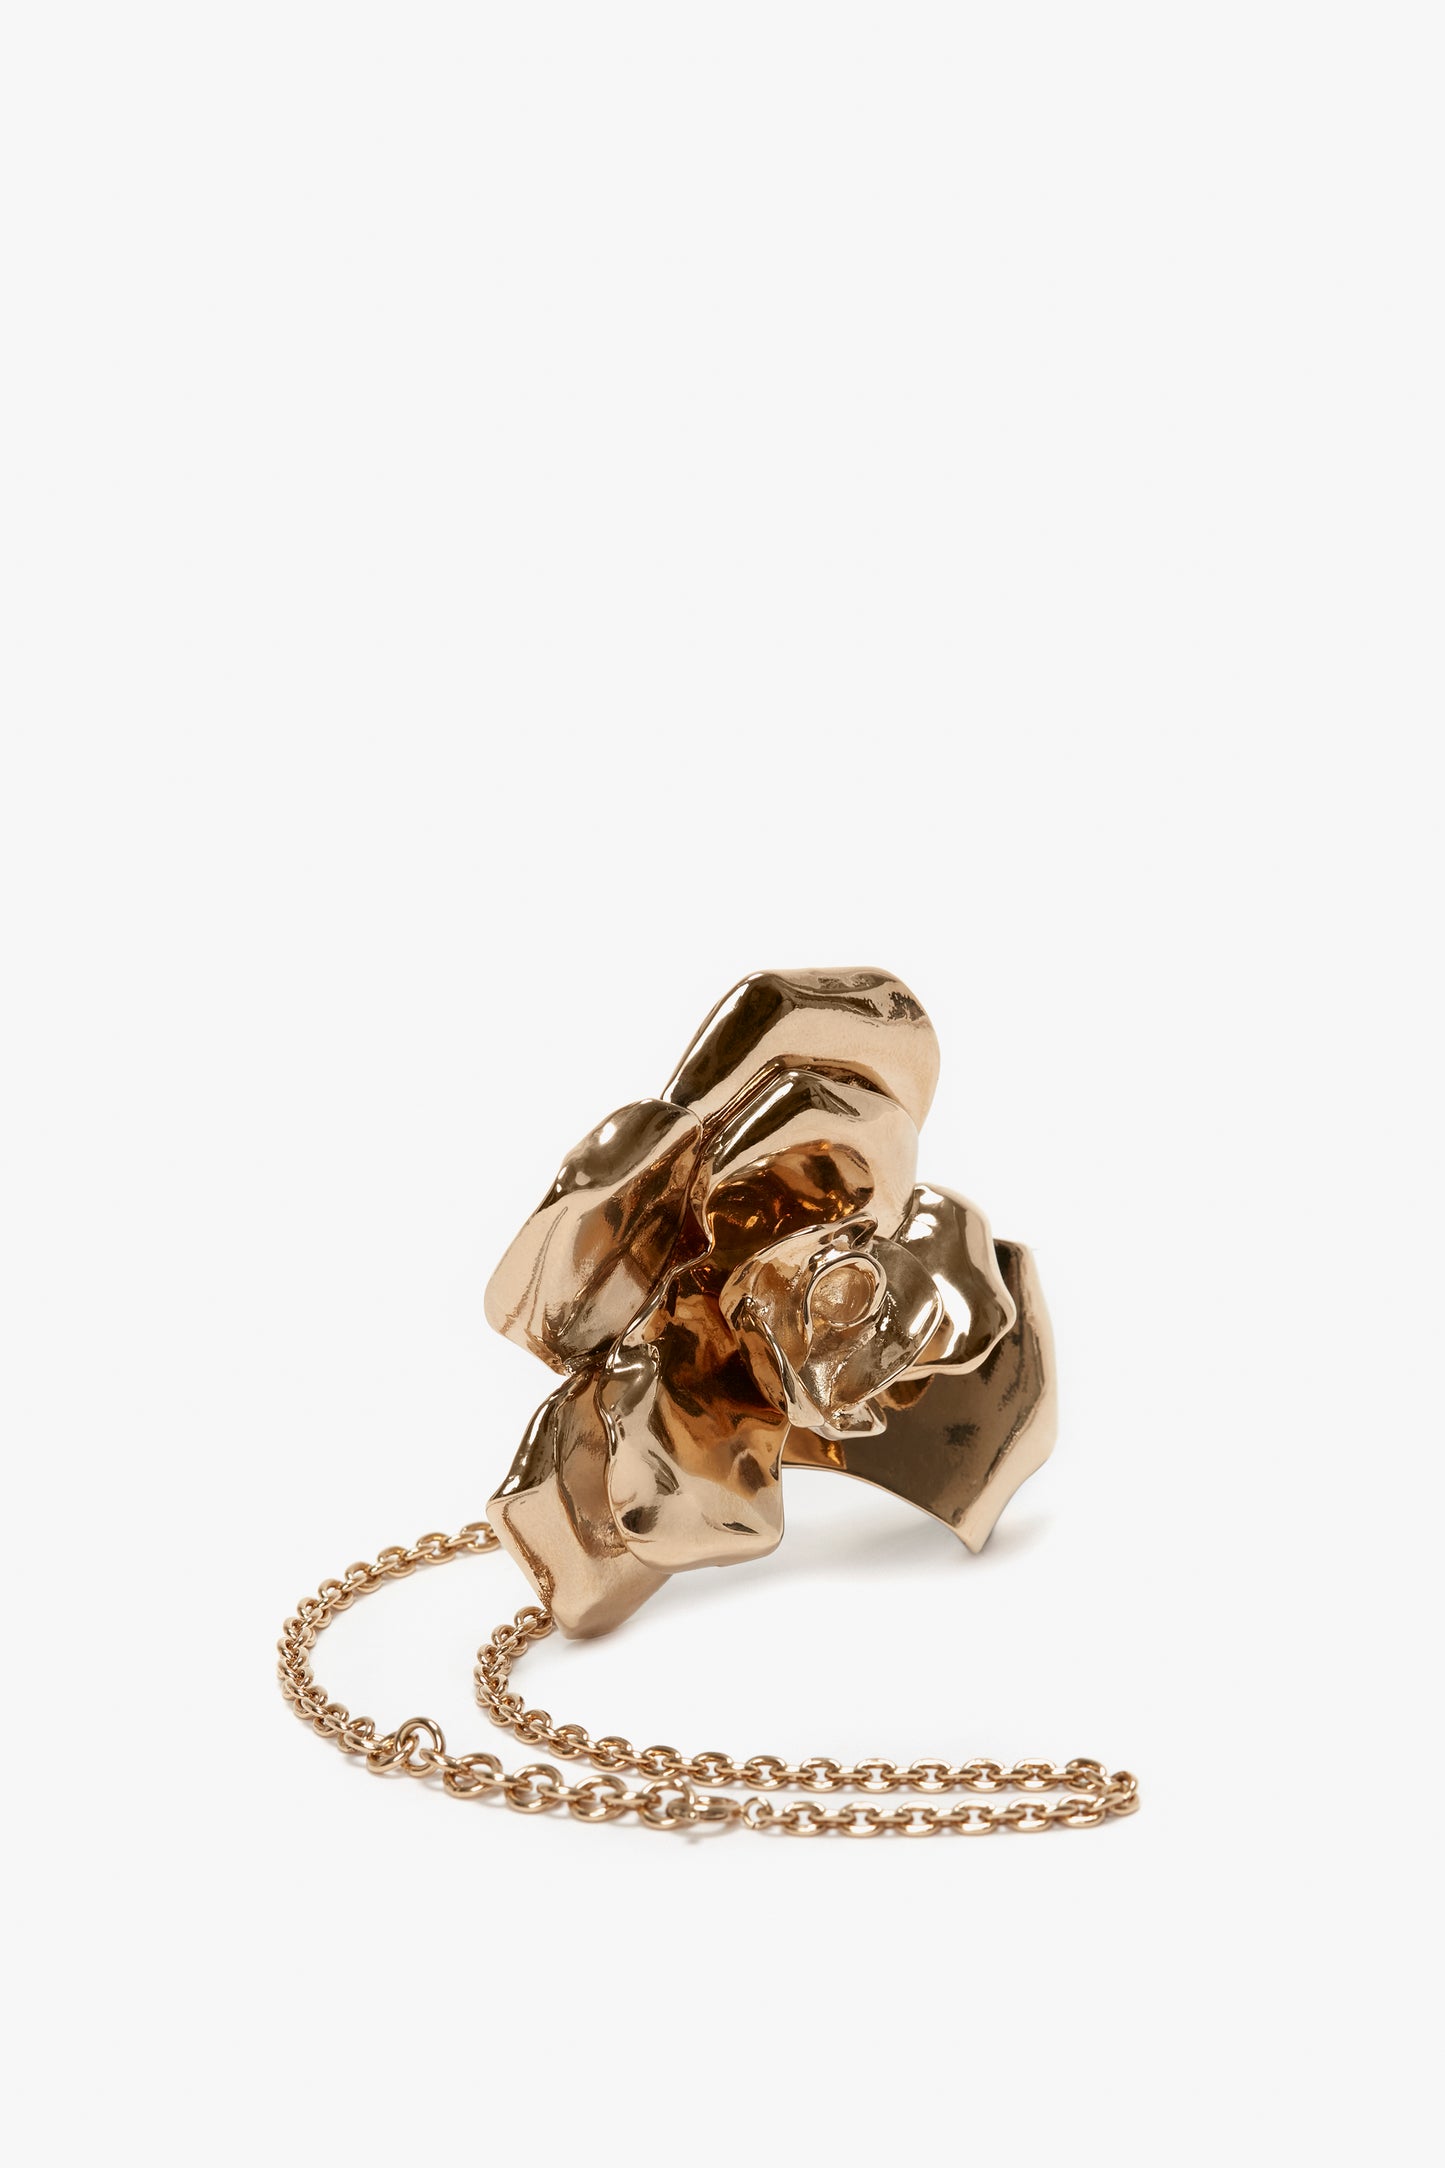 Exclusive Flower Bracelet in Gold by Victoria Beckham, isolated on a white background.